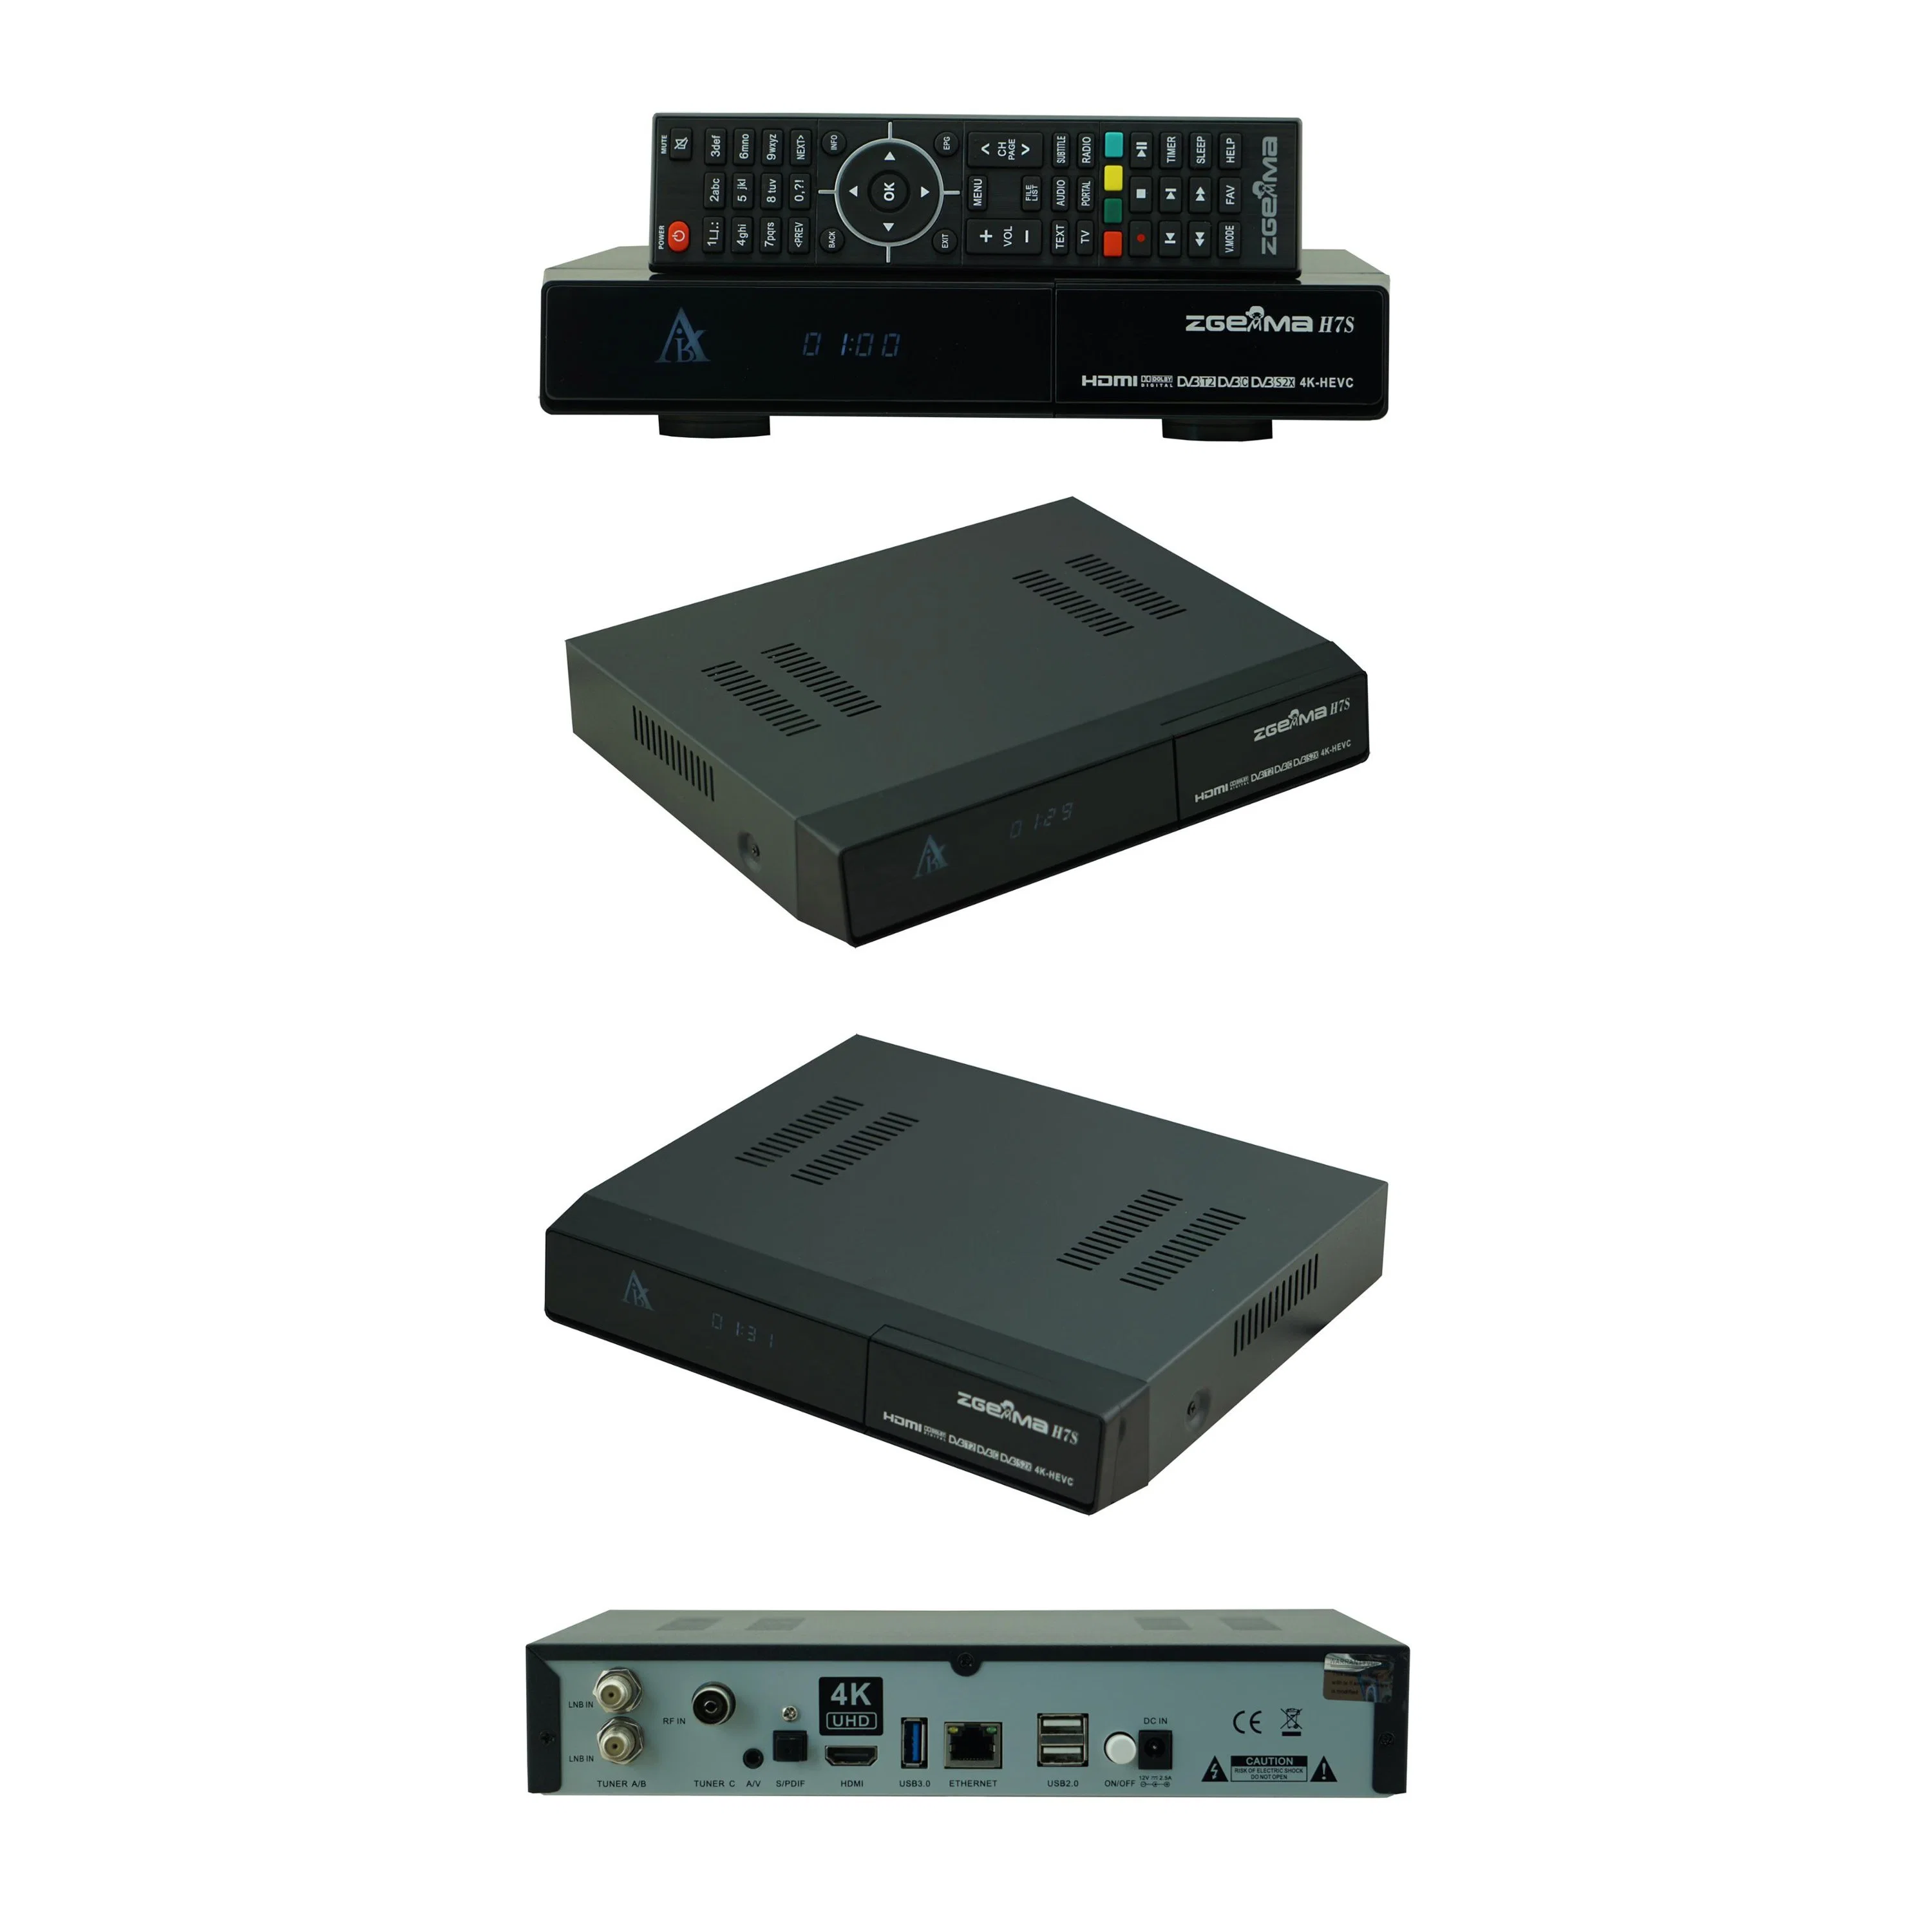 Enhance Your TV Entertainment with Zgemma H7s - 16GB Emmc Flash, 1GB DDR3 Memory Satellite TV Receiver